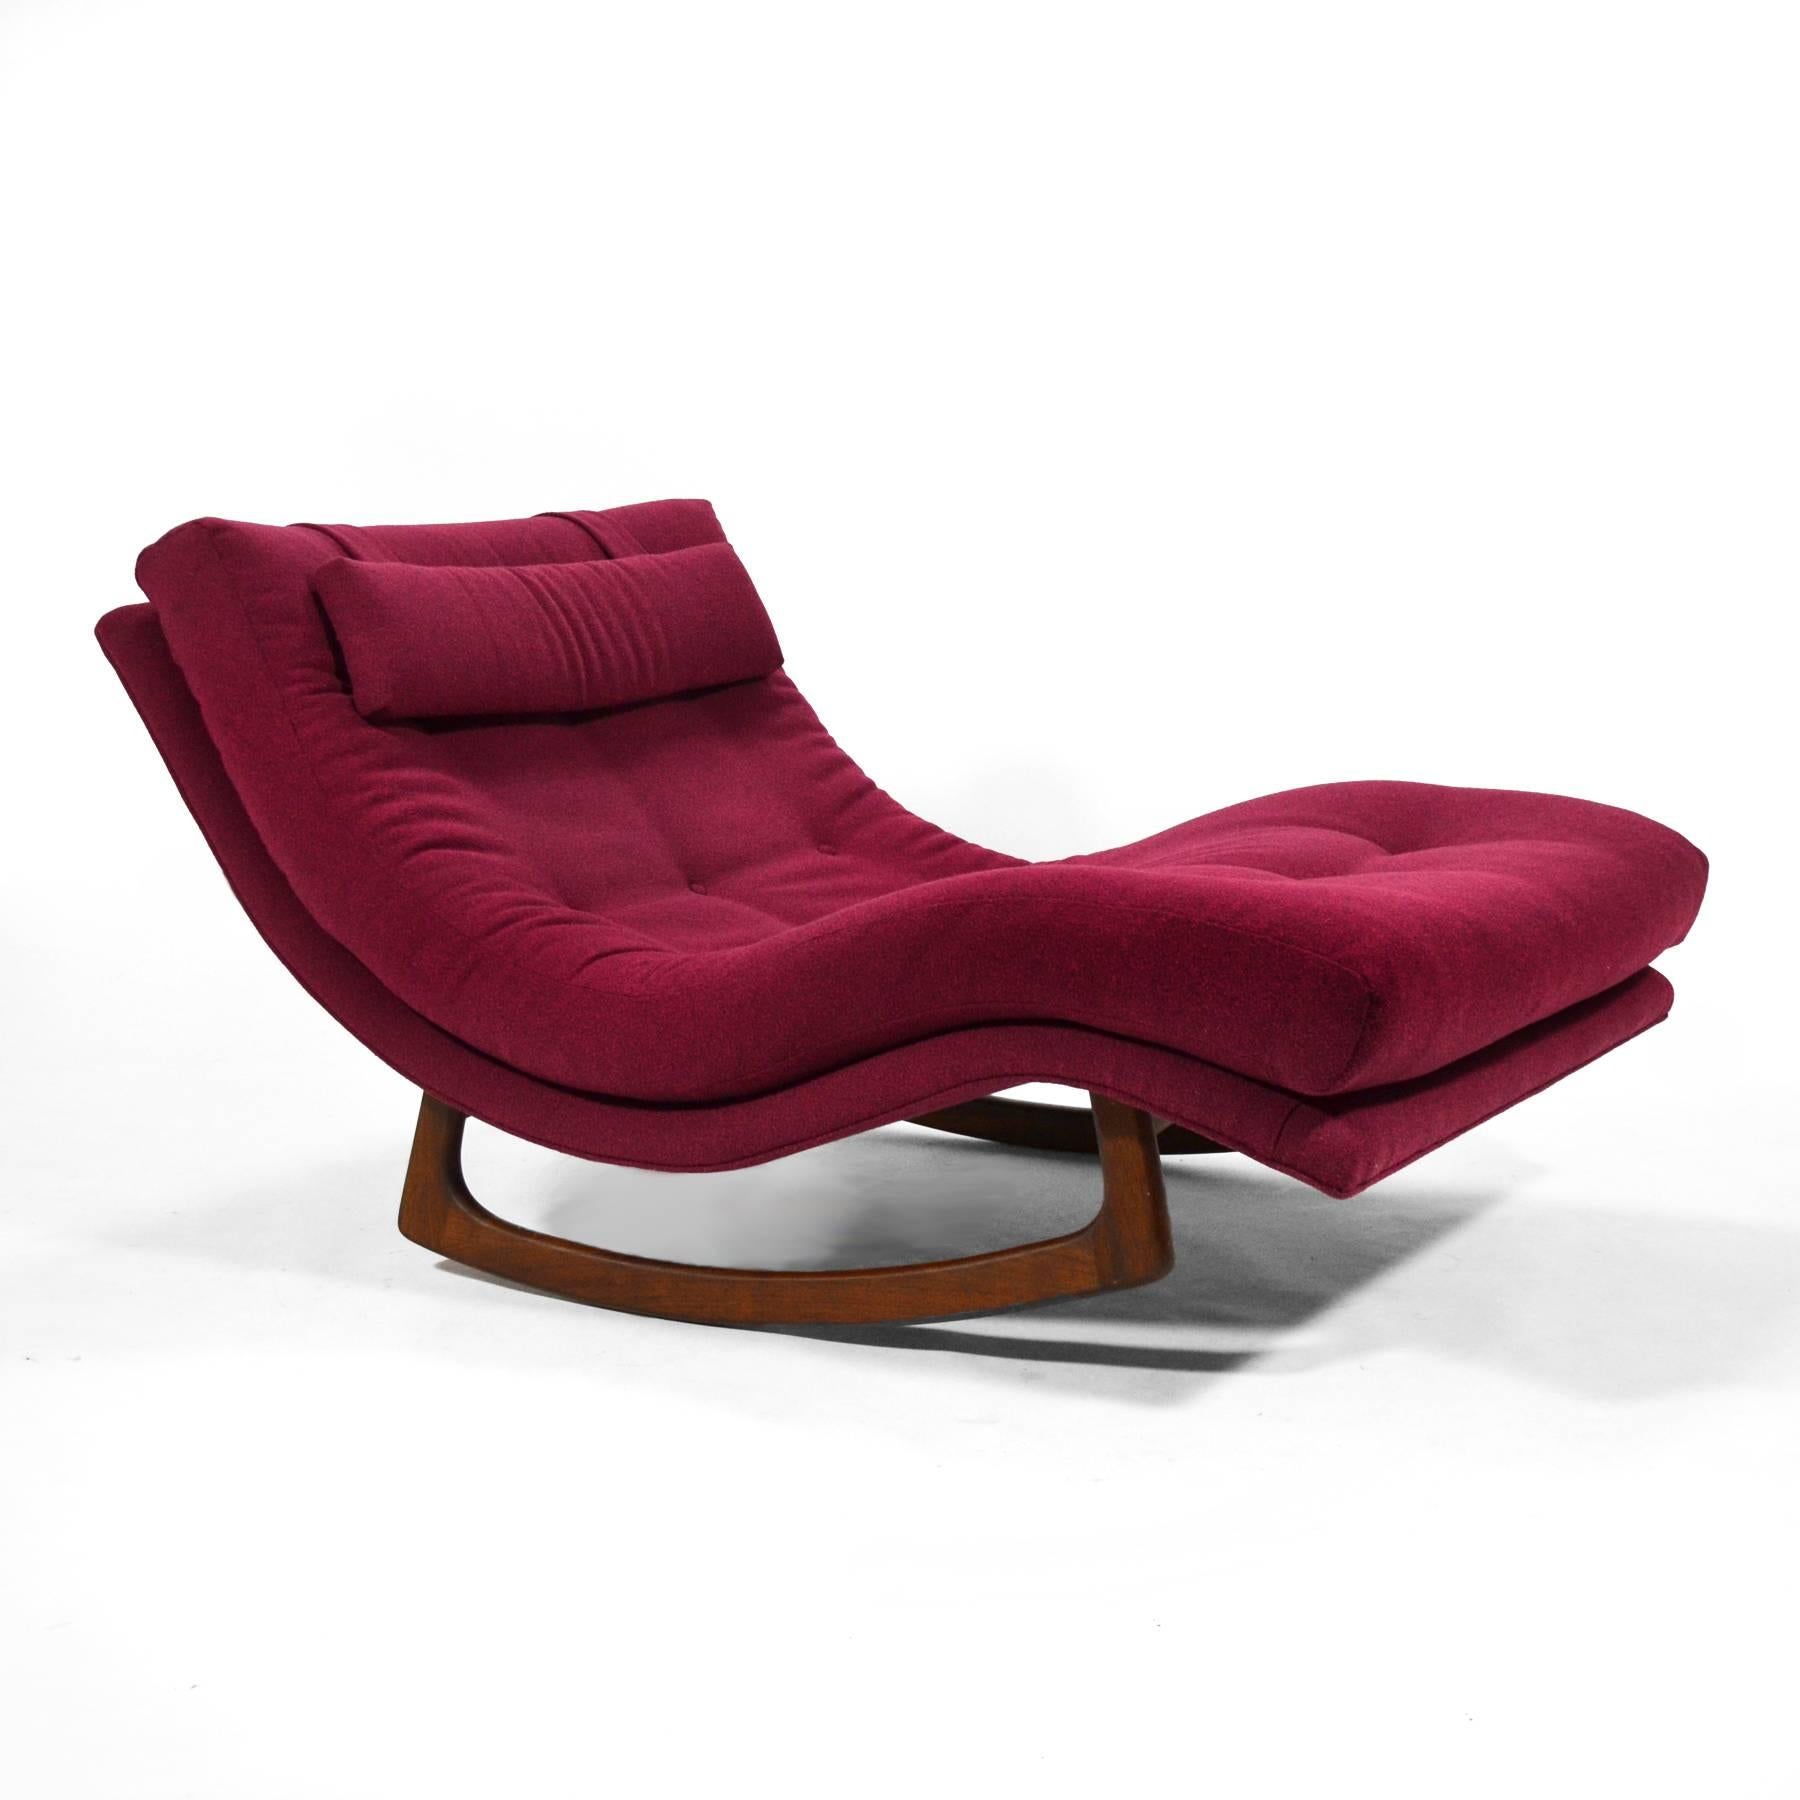 A large and incredibly comfortable chaise with a sculptural walnut base that allows it to rock gently, this design by Adrian Pearsall can be either a statement piece in a living room, or a relaxing seat in a master suite.